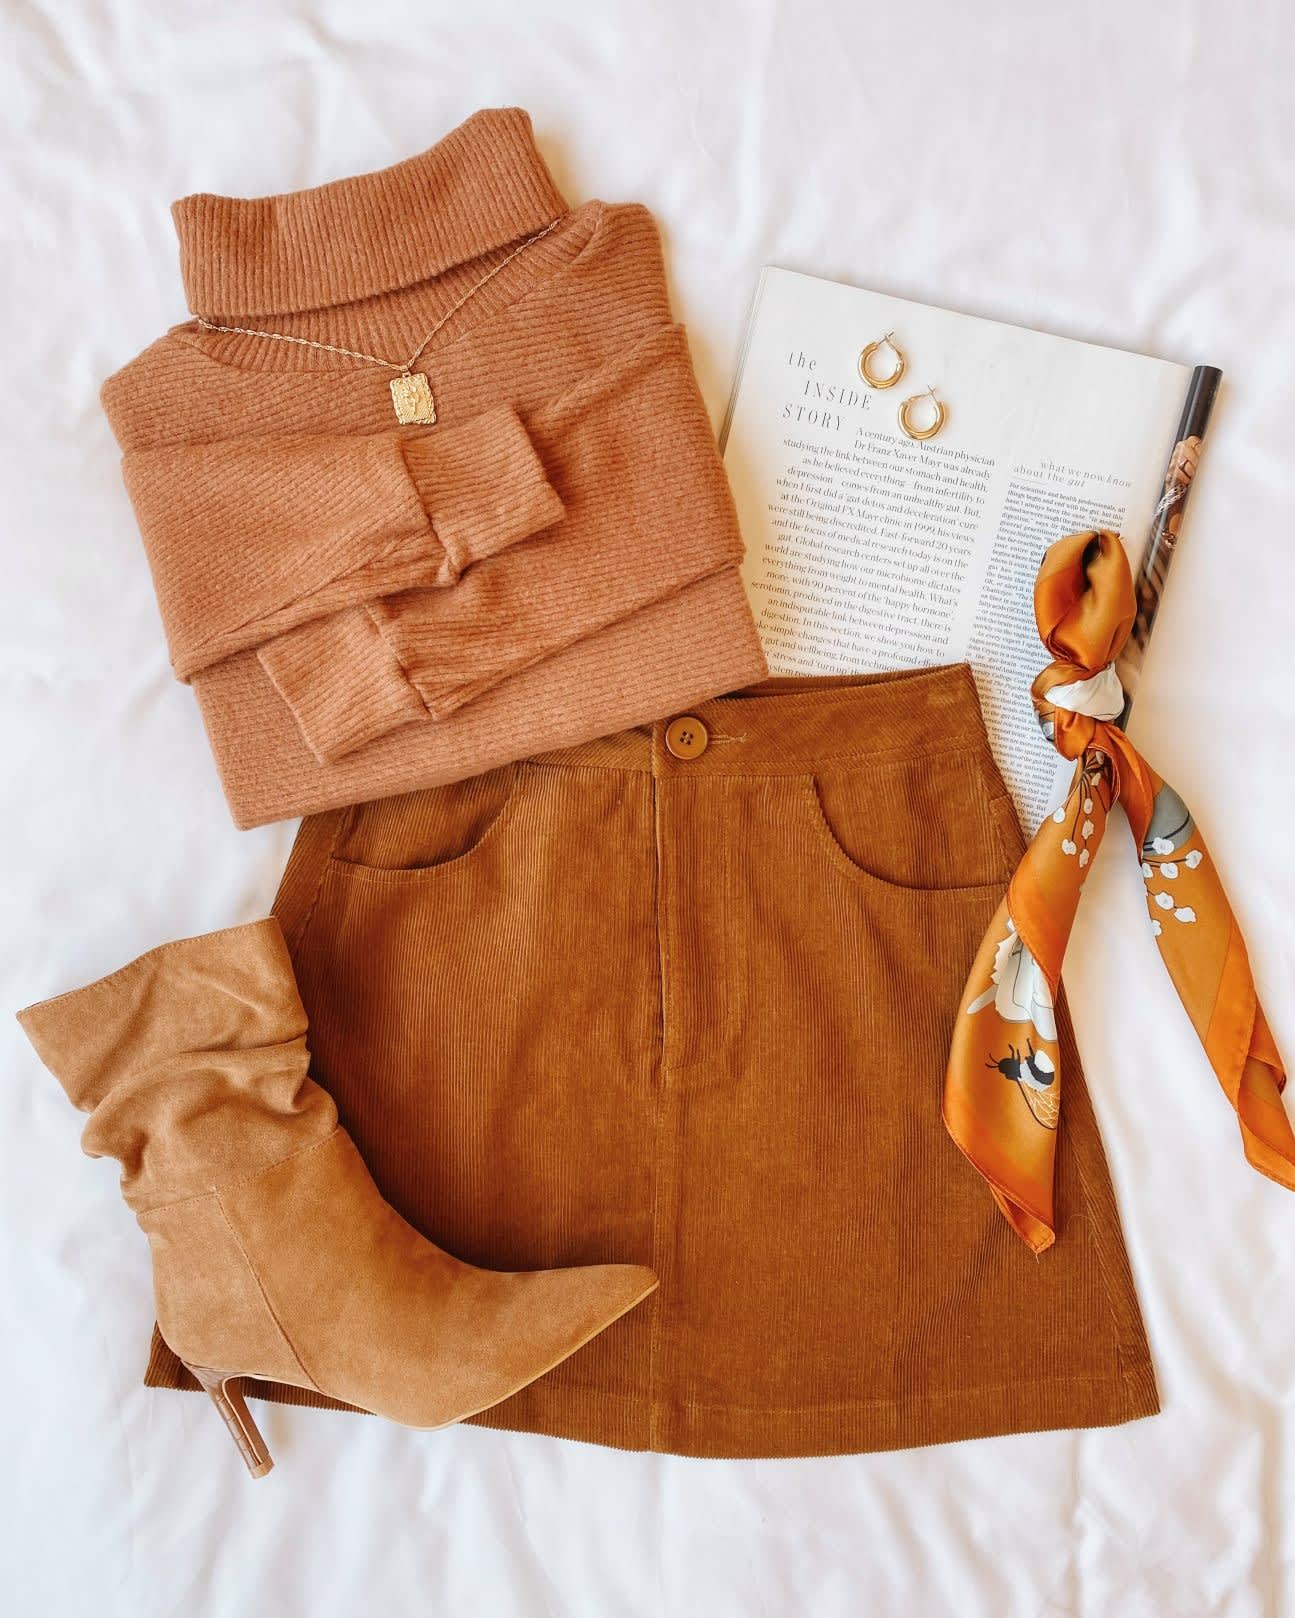 Orange Scarf with Brown Pumps Outfits (2 ideas & outfits)